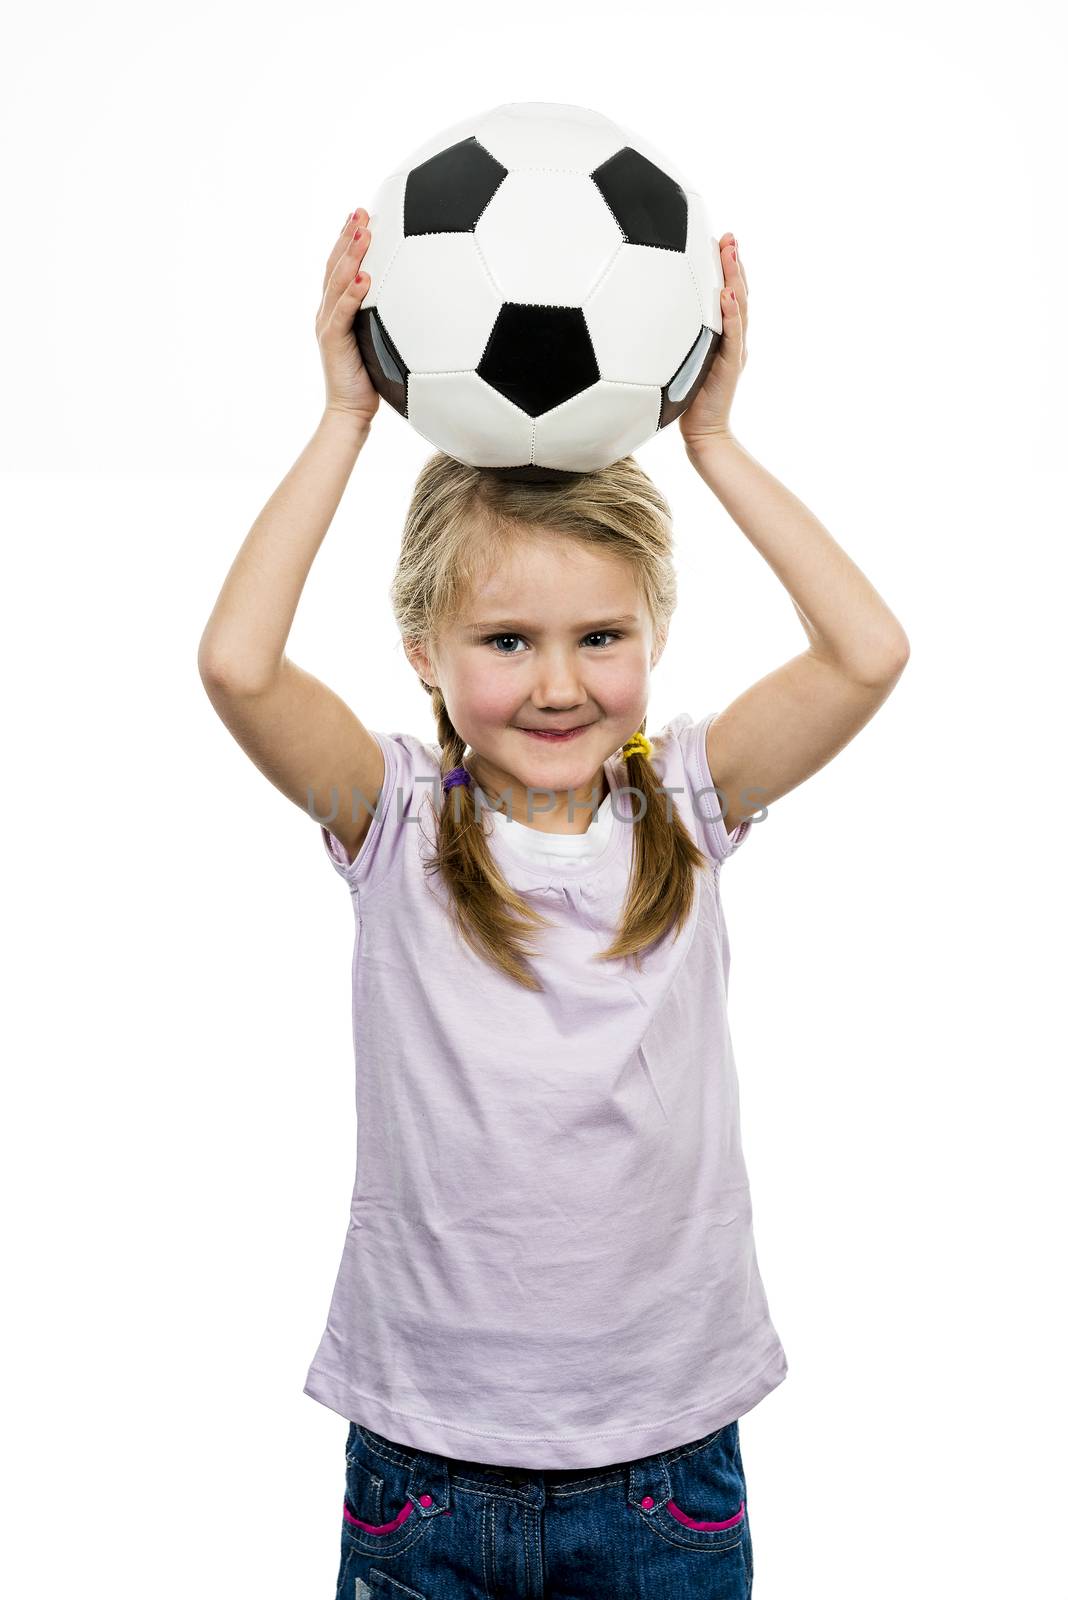 Cute girl playing football, happy child, young female goalkeeper enjoying sport game, holding ball, isolated portrait of a preteen smiling and having fun, kids activities, little footballer 